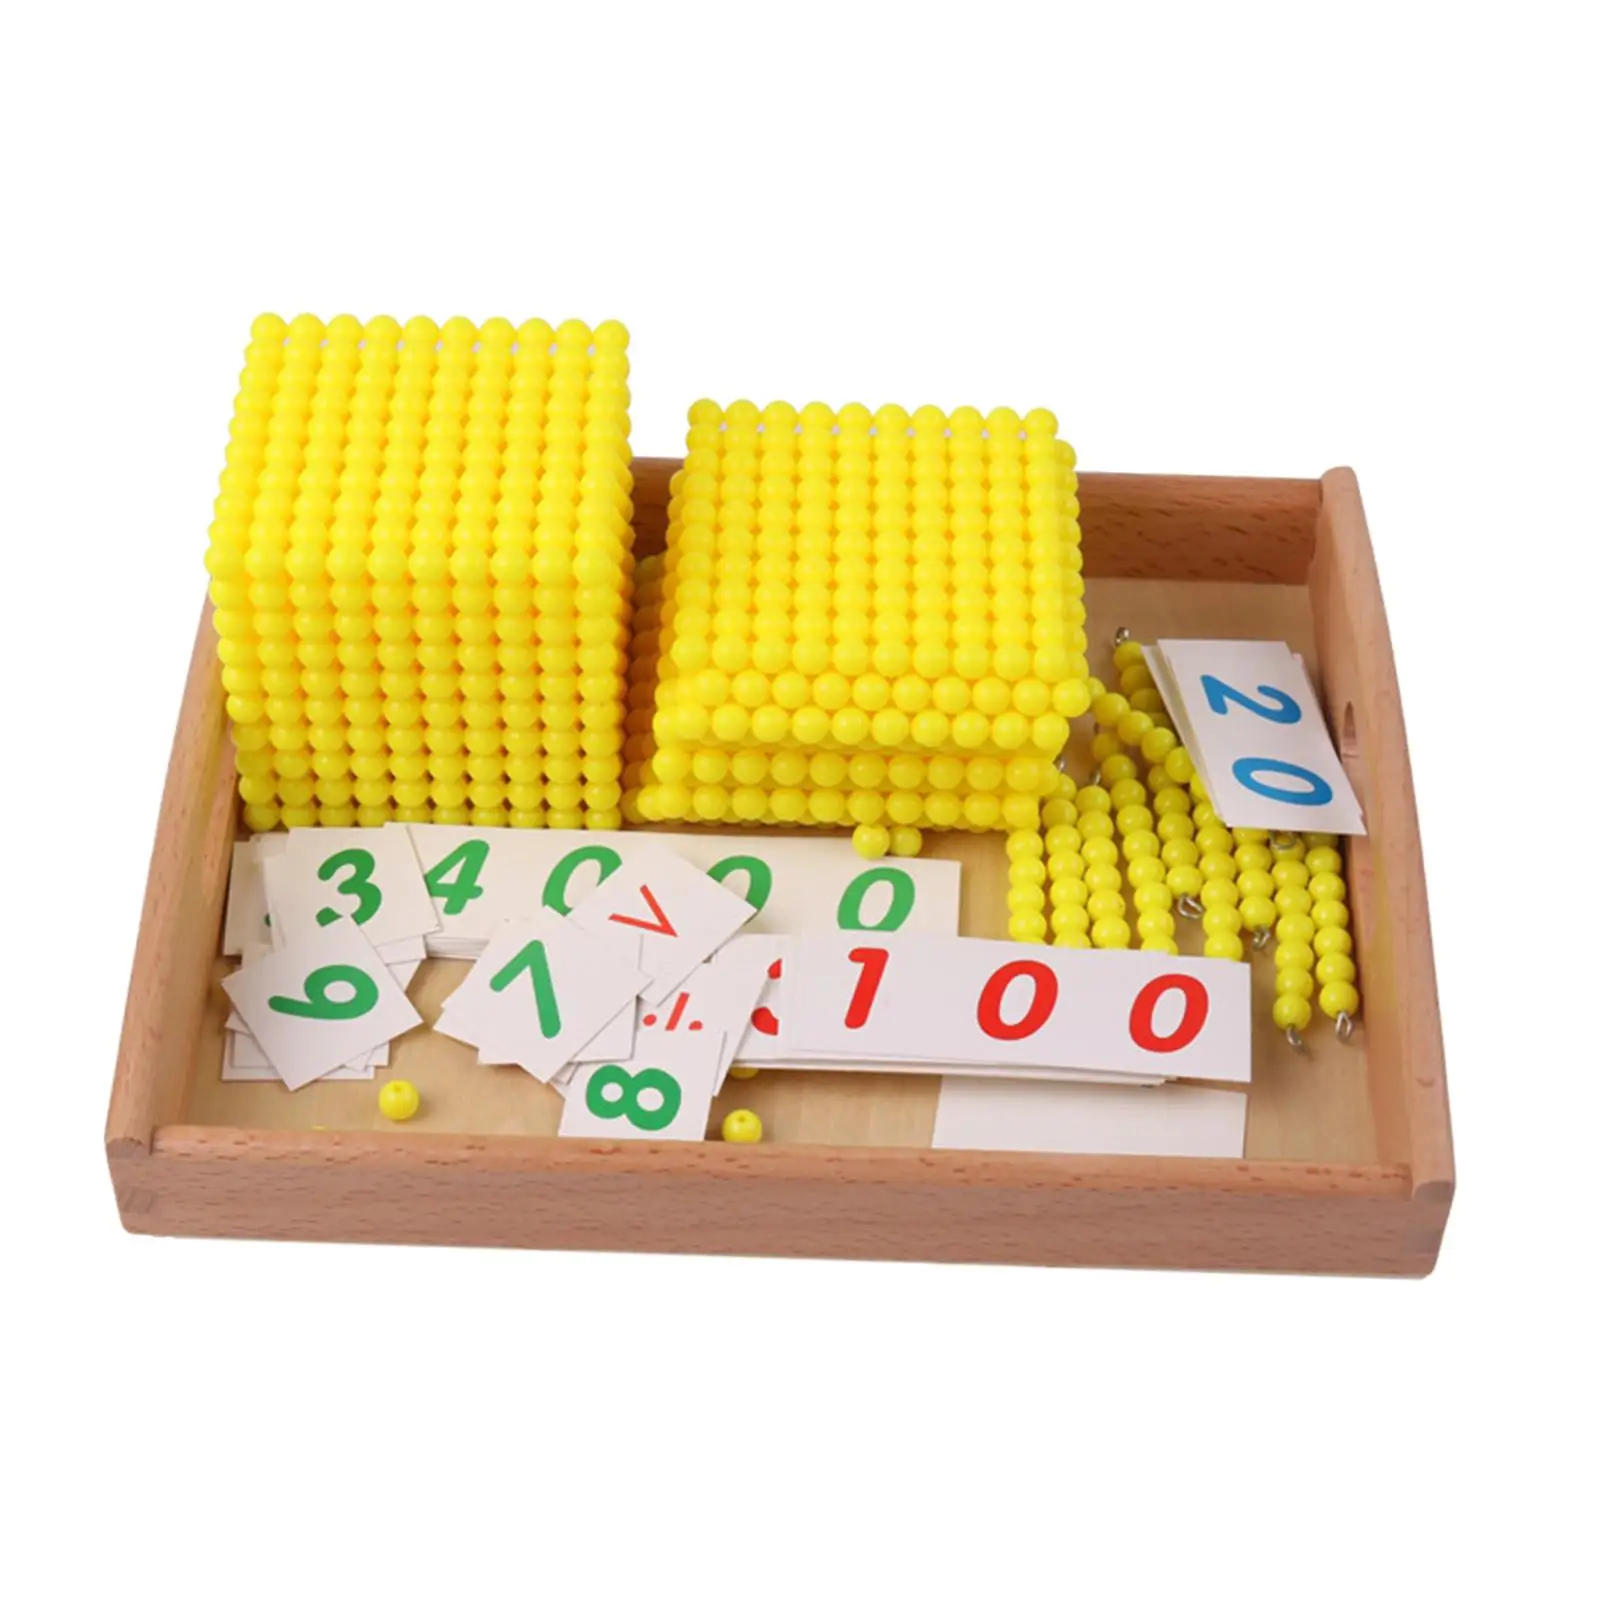 

Montessori Math Counting Beads Decimal System Hands On for Toddlers Children